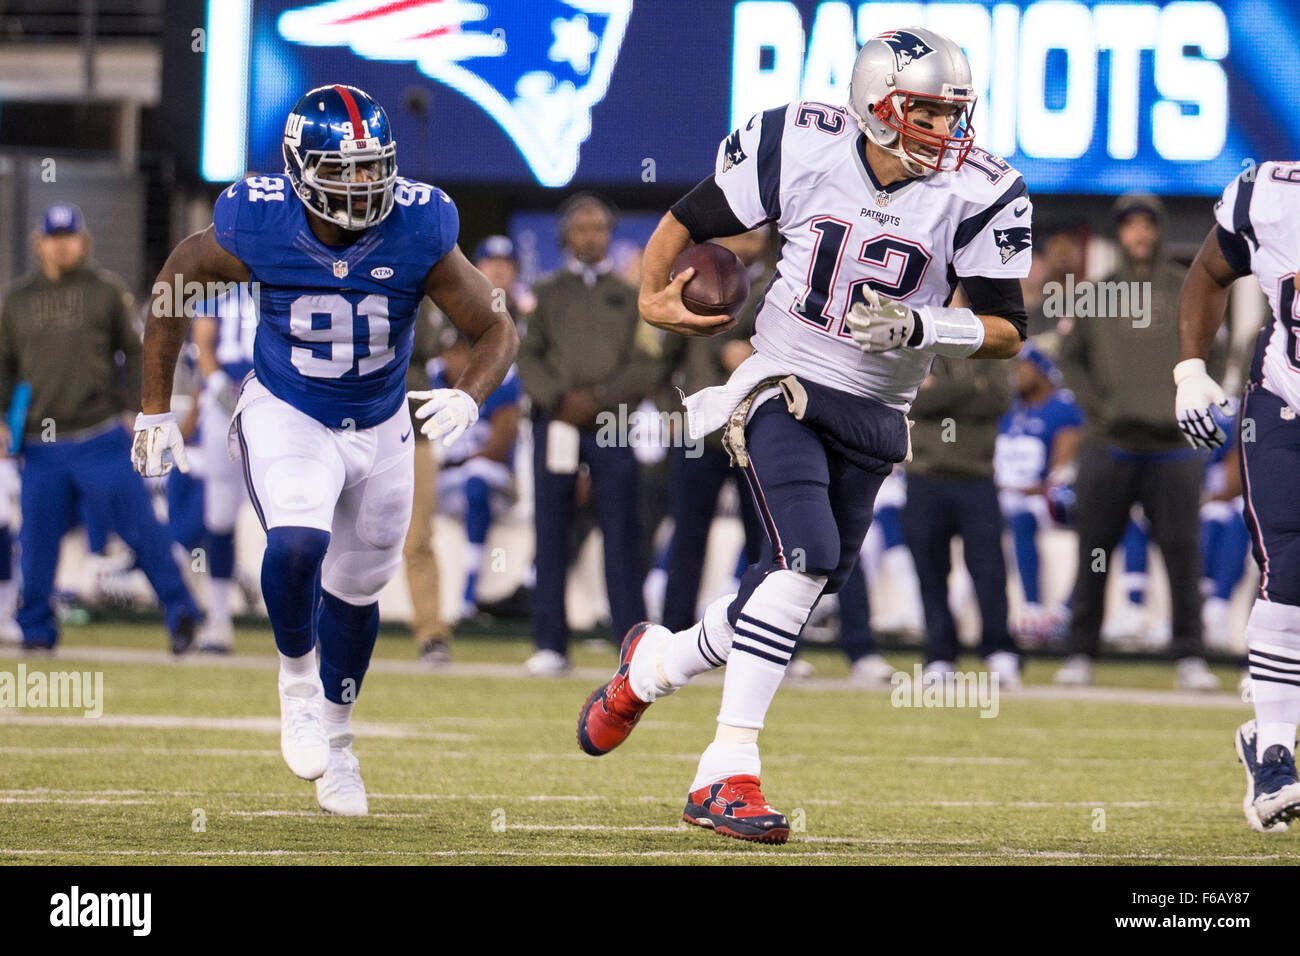 East Rutherford, New Jersey, USA. 15th Nov, 2015. New England Patriots quarterback Tom Brady (12) runs with the ball as New York Giants defensive end Robert Ayers (91) gives chase during the NFL game between the New England Patriots and the New York Giants at MetLife Stadium in East Rutherford, New Jersey. Christopher Szagola/CSM/Alamy Live News Stock Photo